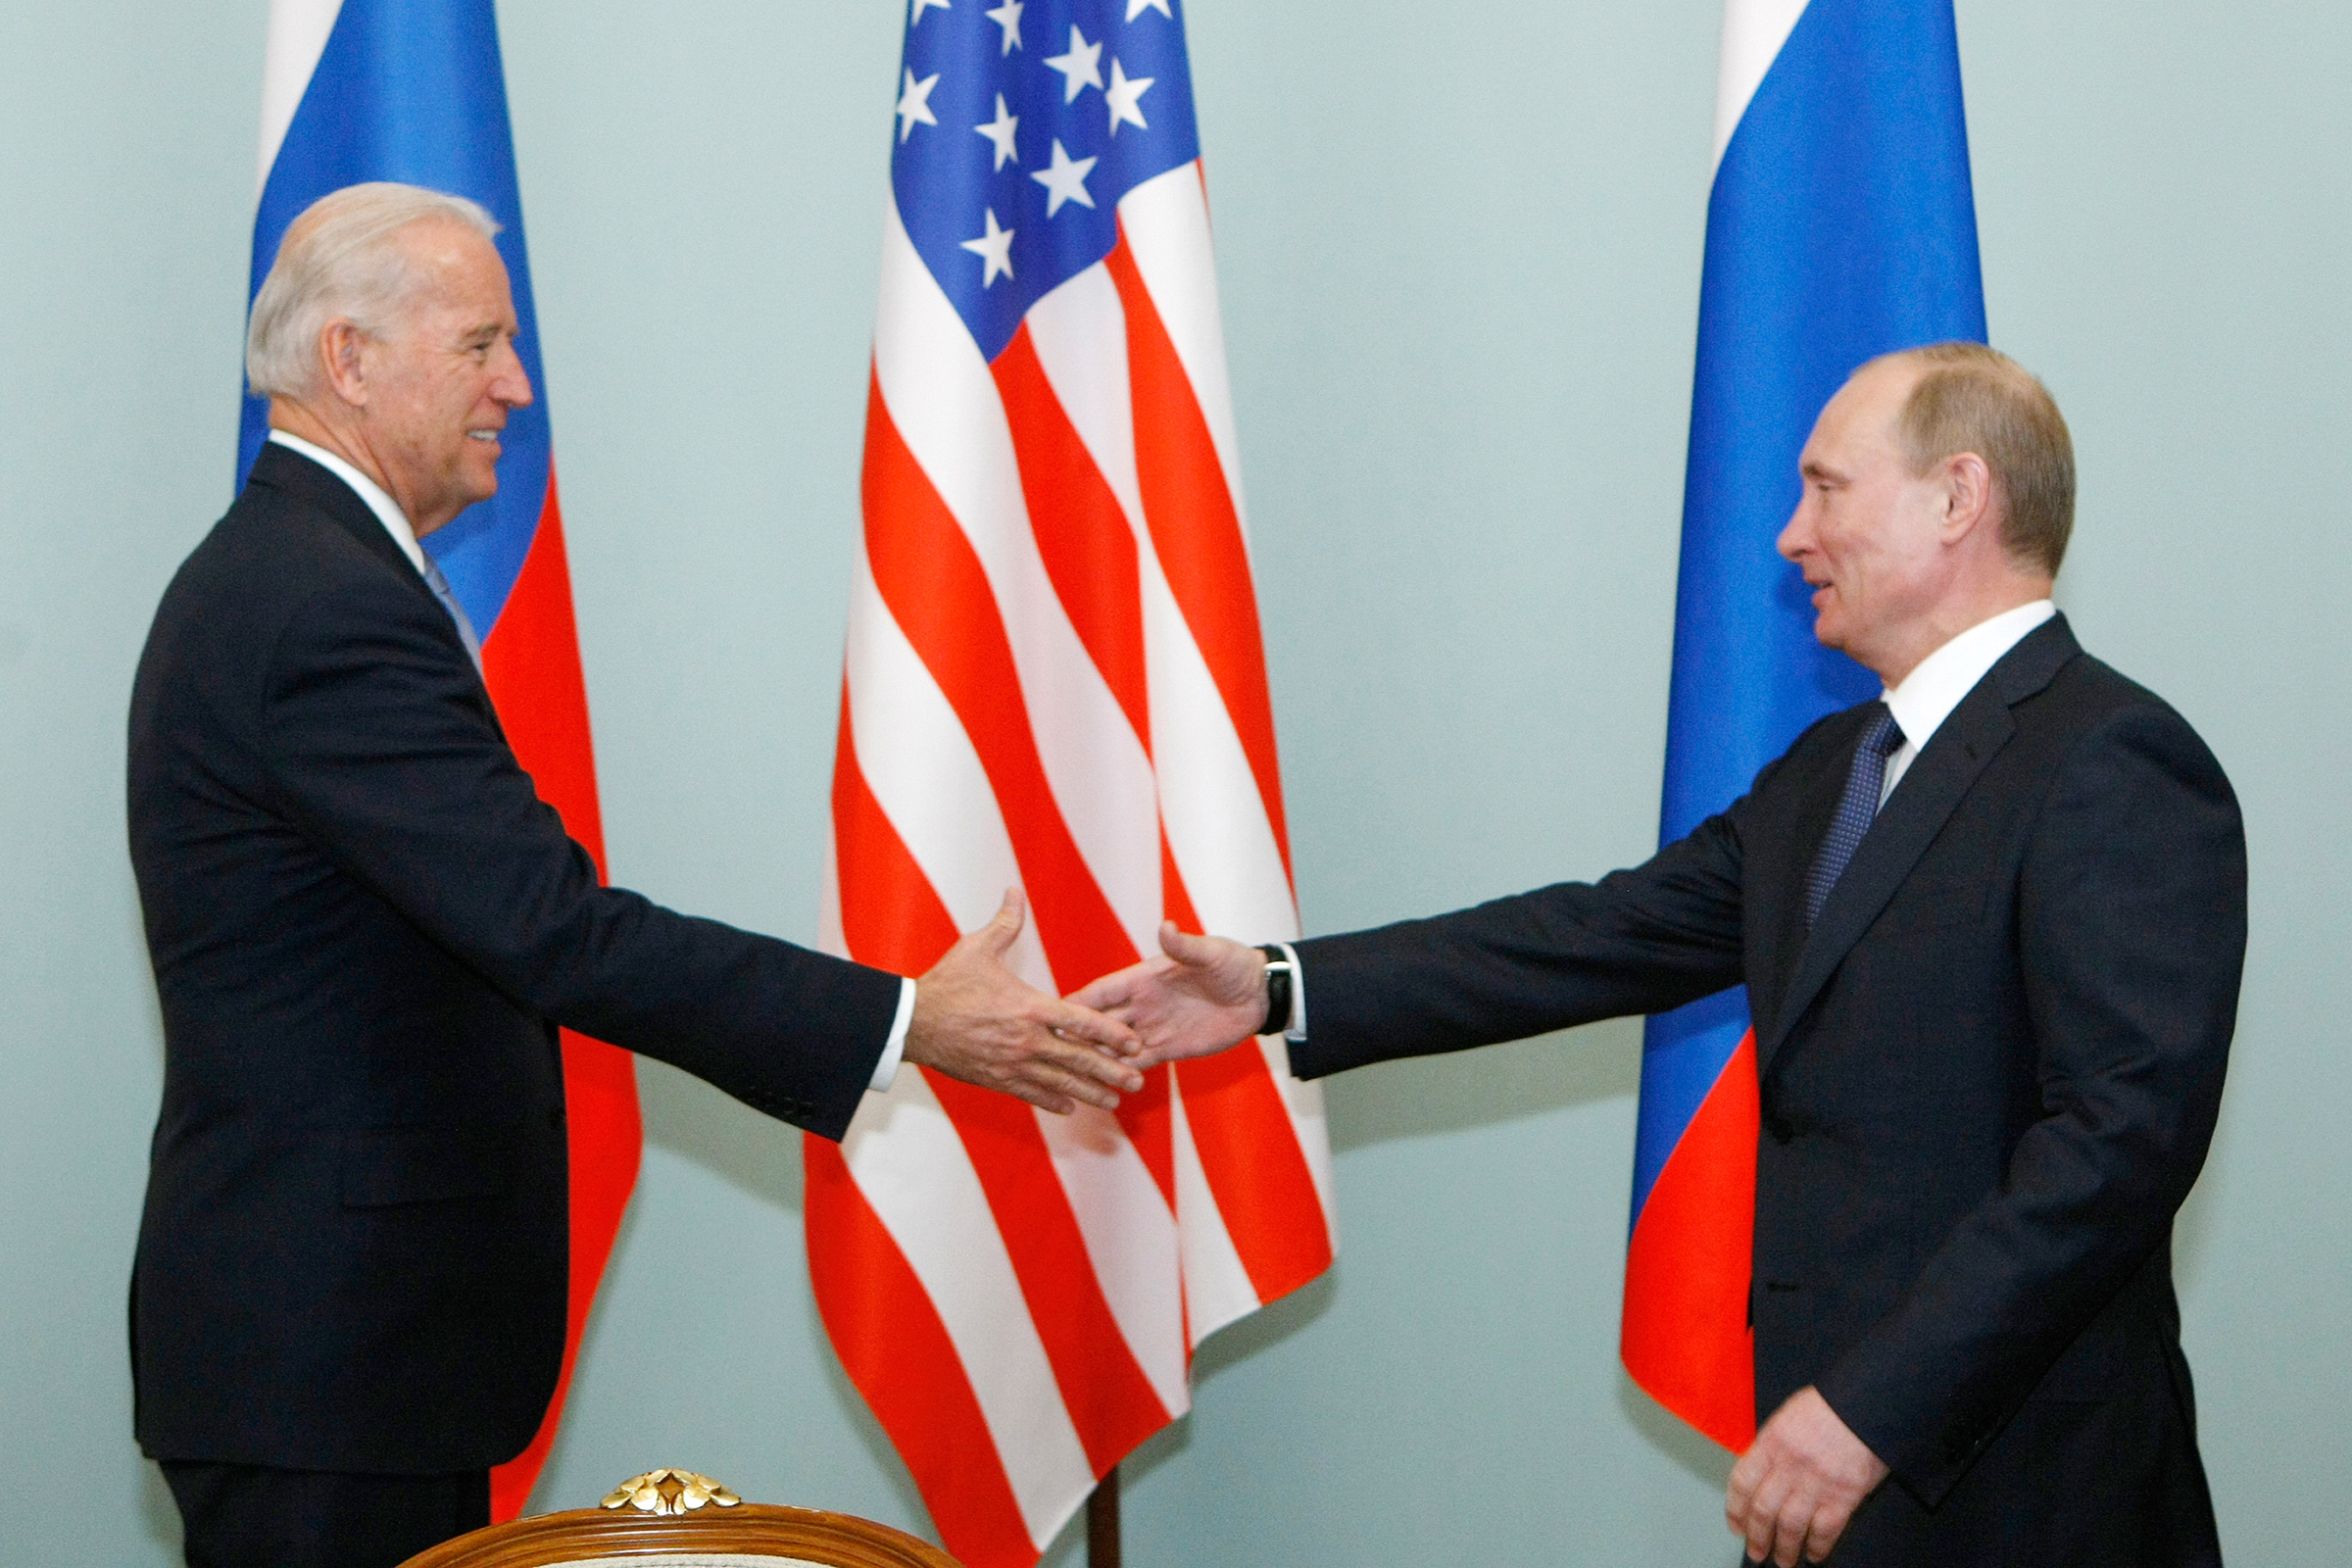 In 2011, then Vice President Joe Biden met Vladimir Putin, Russia’s Prime Minister at the time, in Moscow